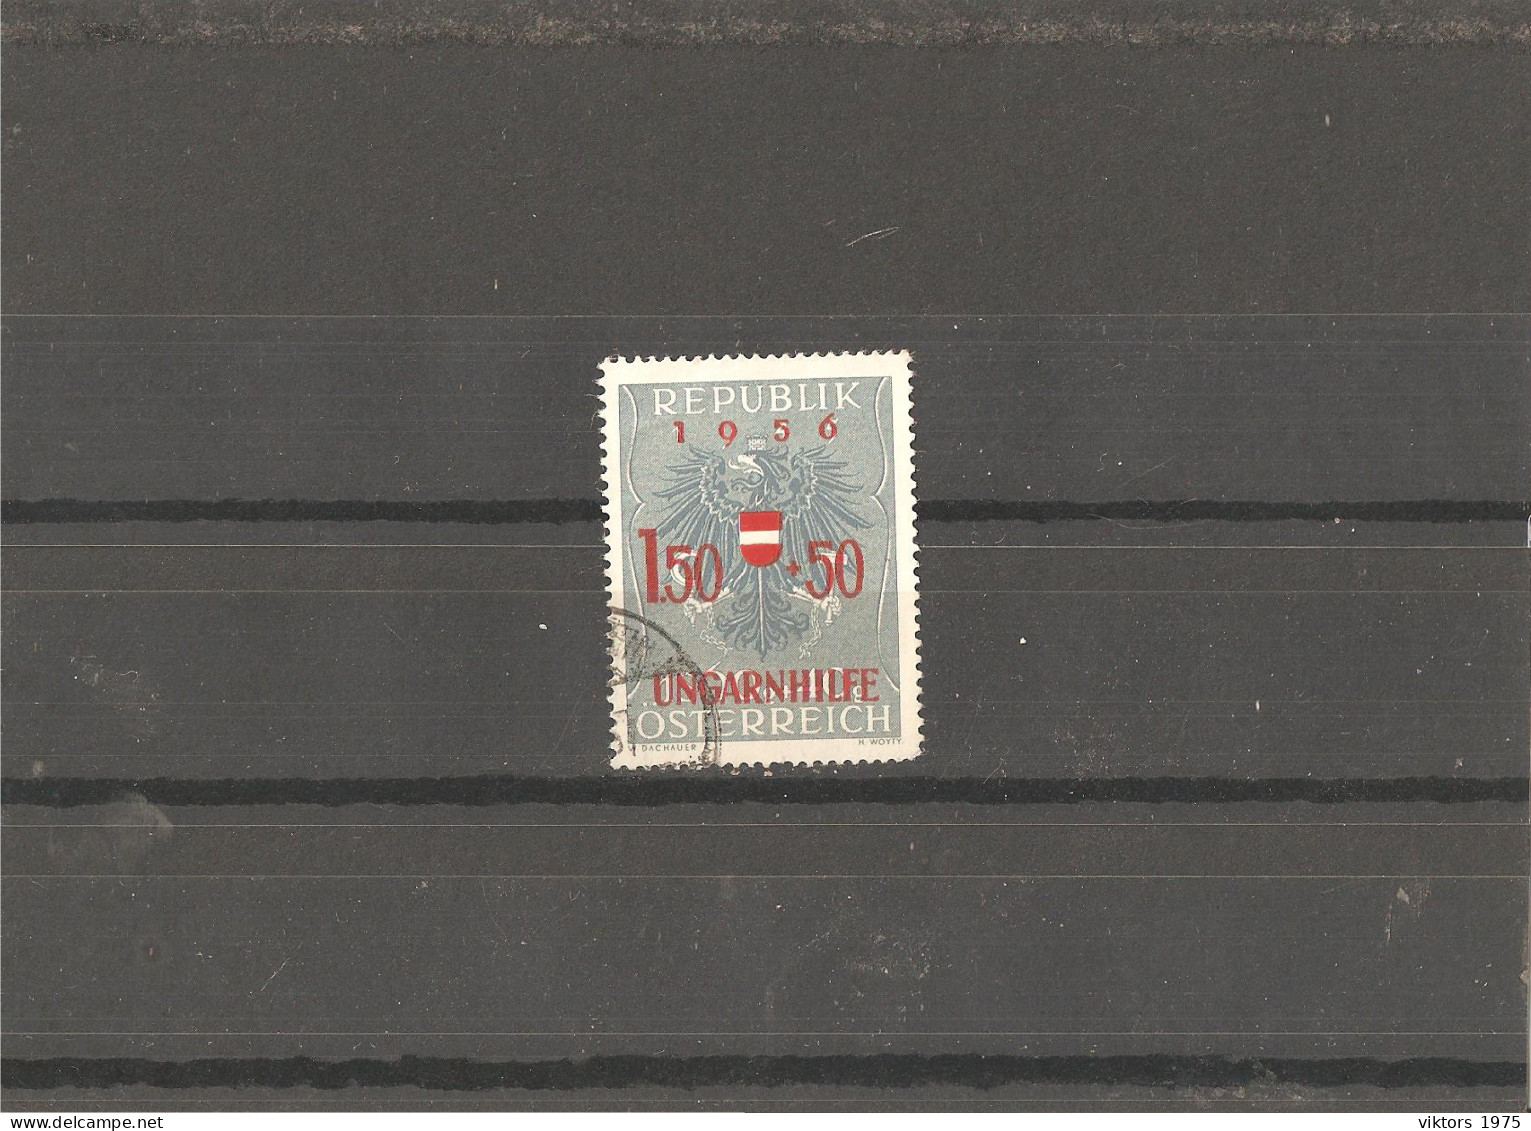 Used Stamp Nr.1030 In MICHEL Catalog - Used Stamps